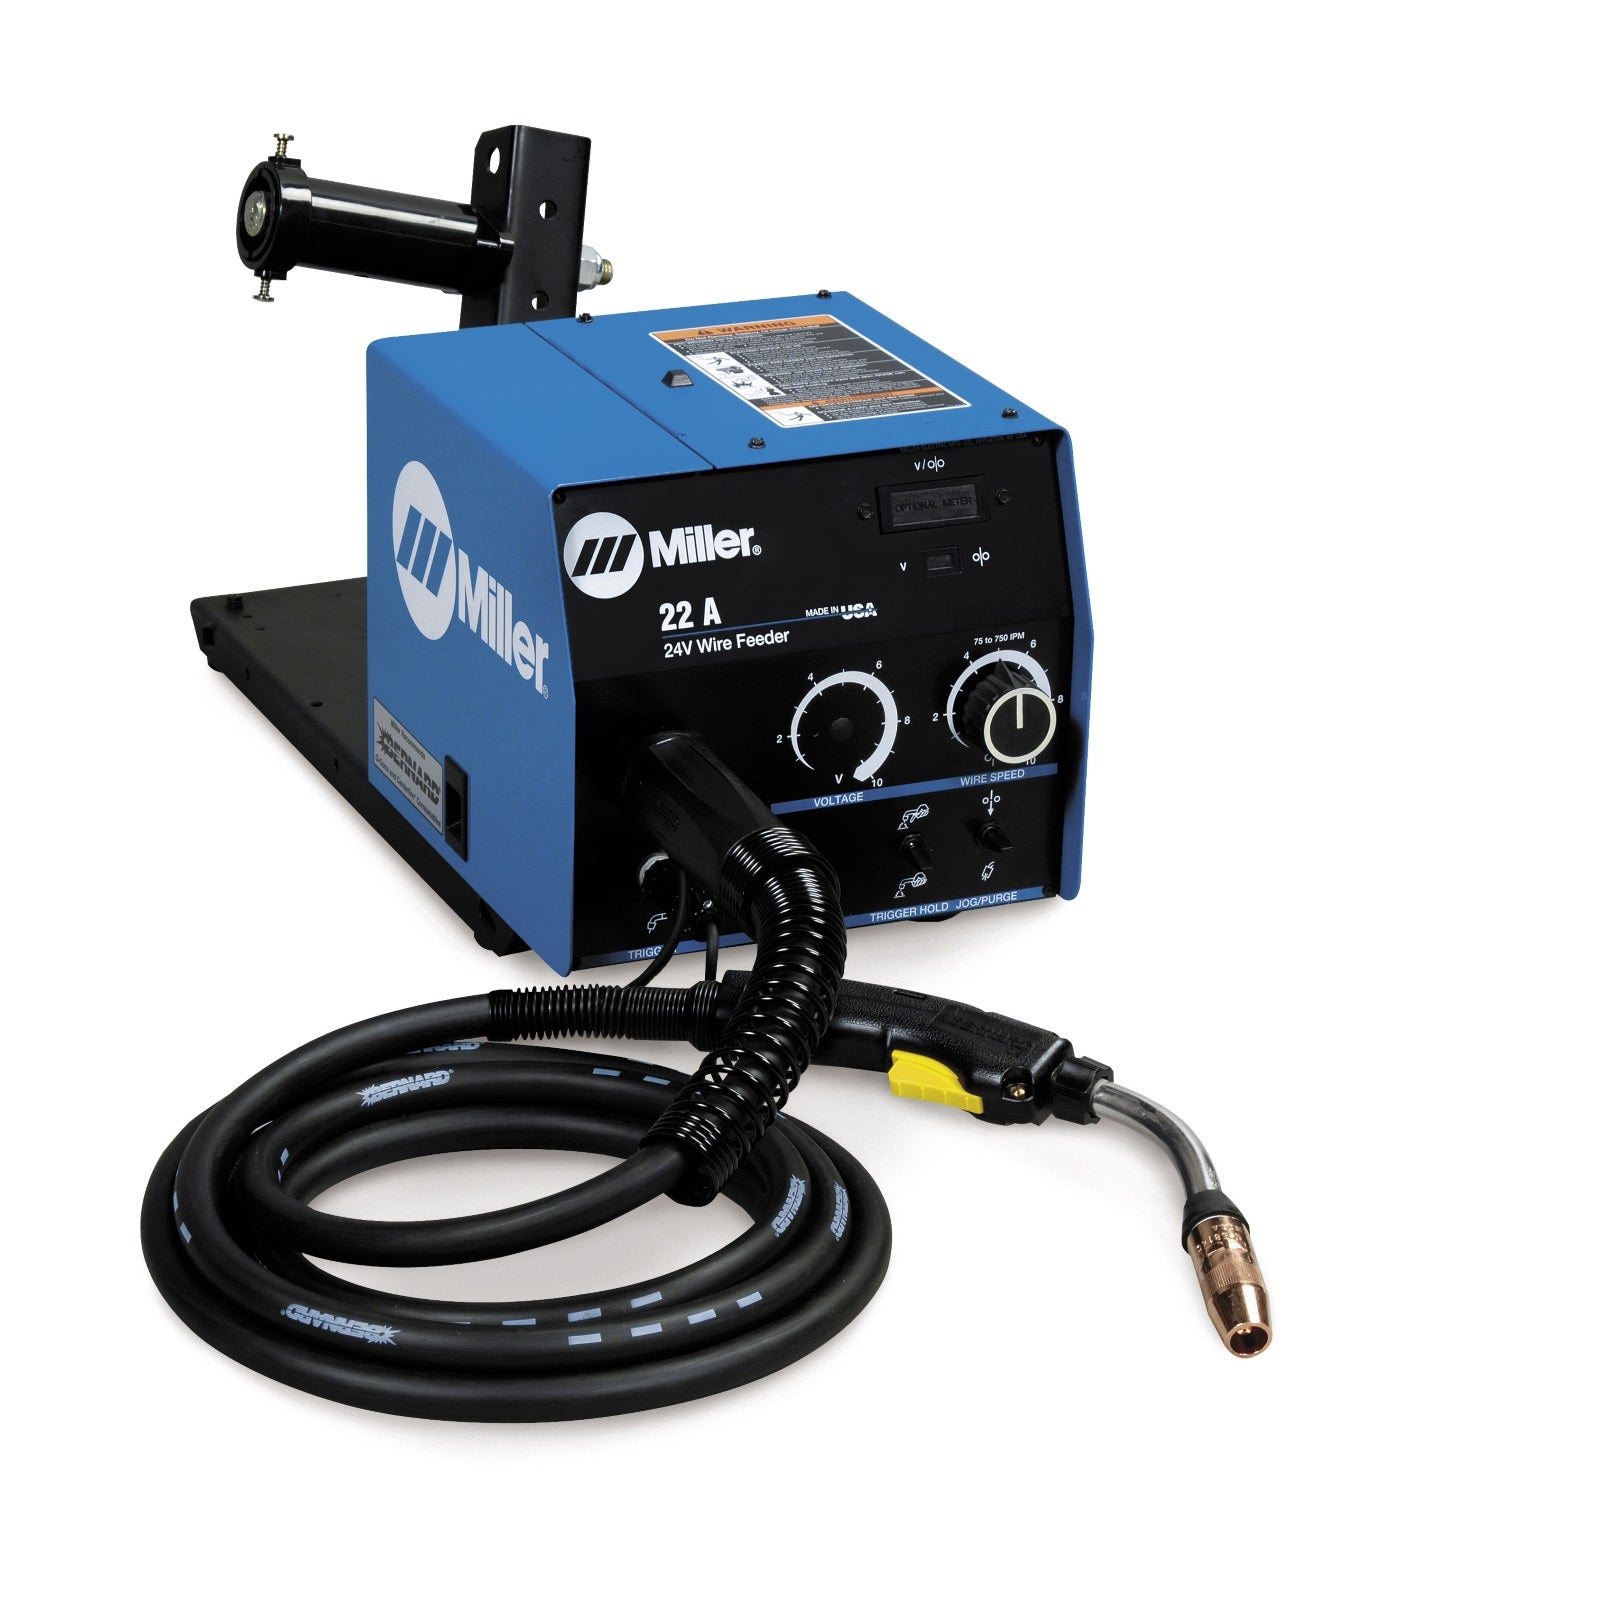 Miller 22A Wire Feeder with Digital Display and Voltage Control (951192)